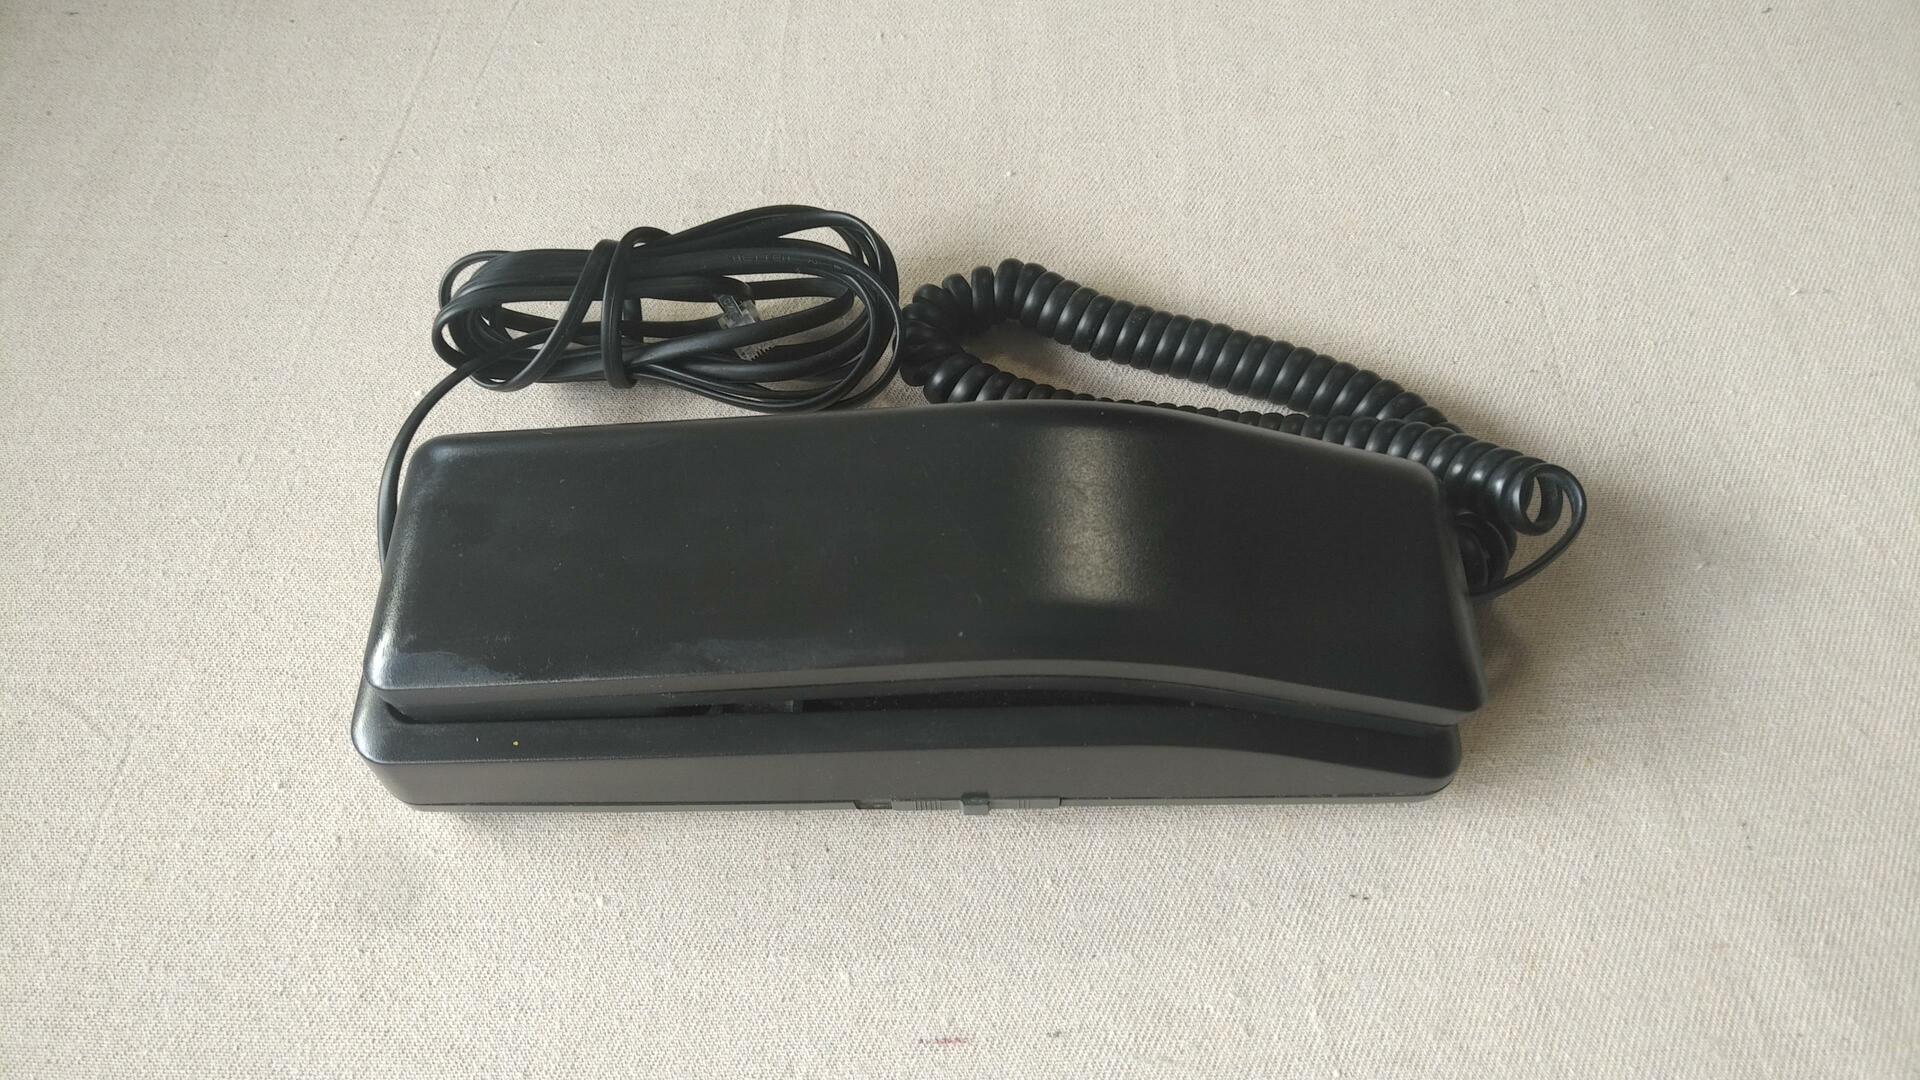 Nice Solo model black retro touch dial phone by Northern Telecom in mid 1990s. Vintage made in Canada collectible telephone and communication equipment